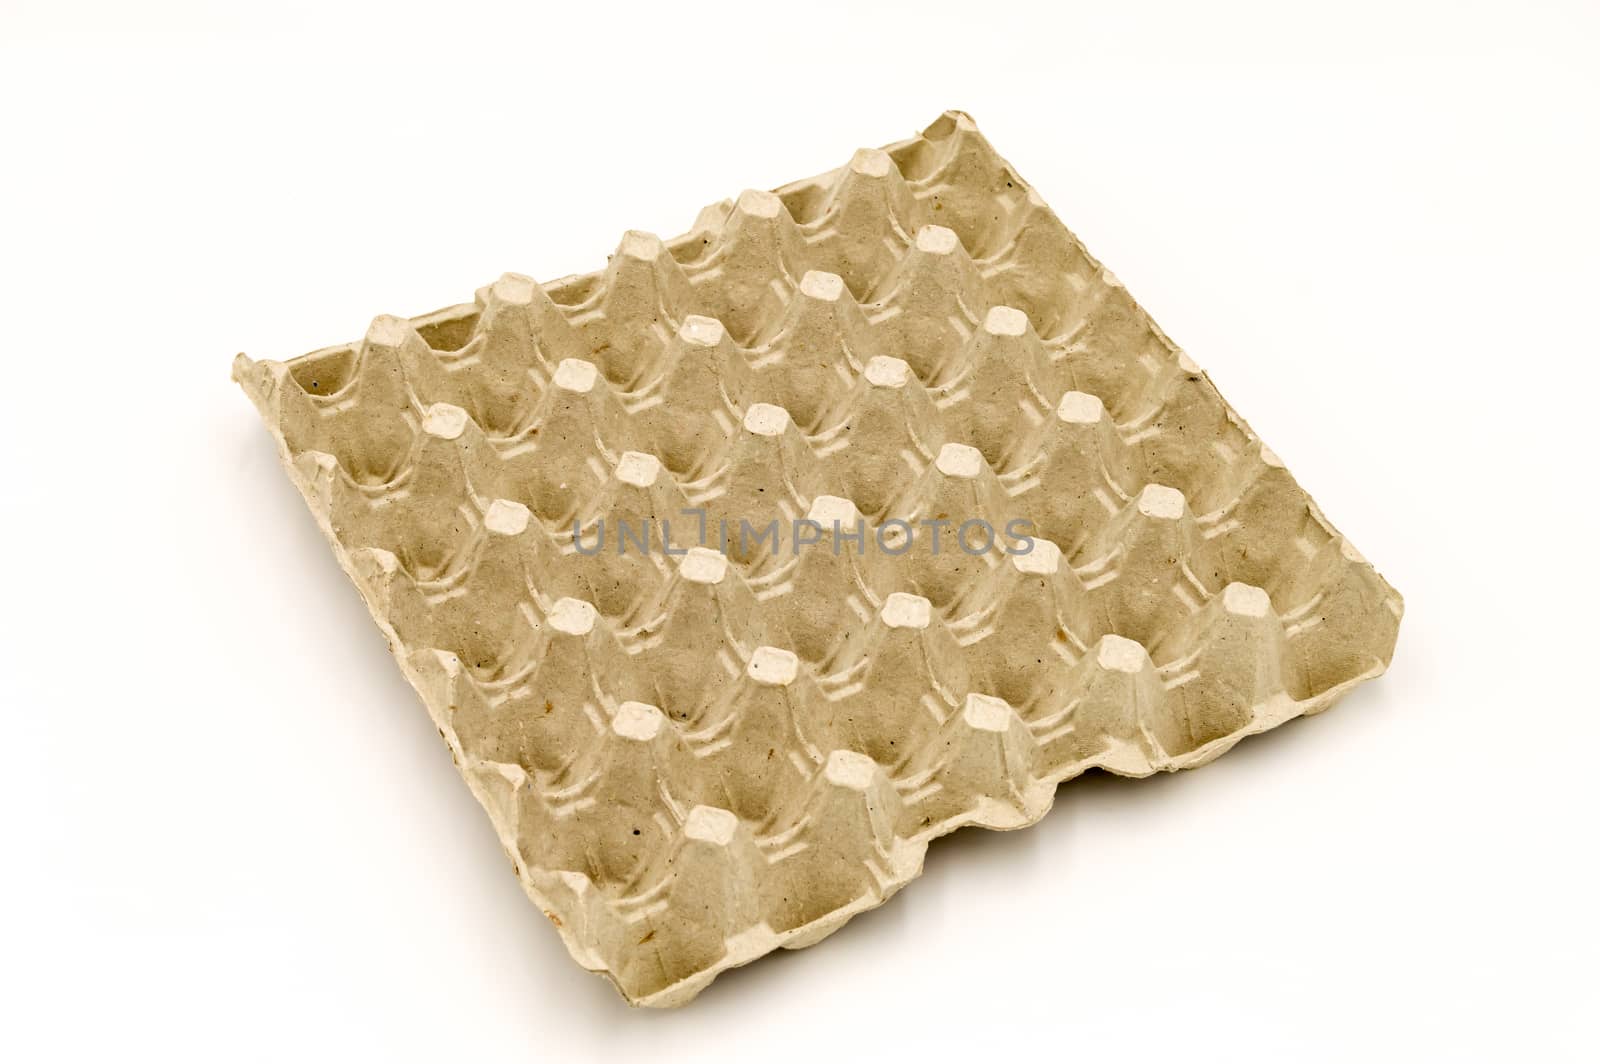 Empty cardboard egg tray on a white background